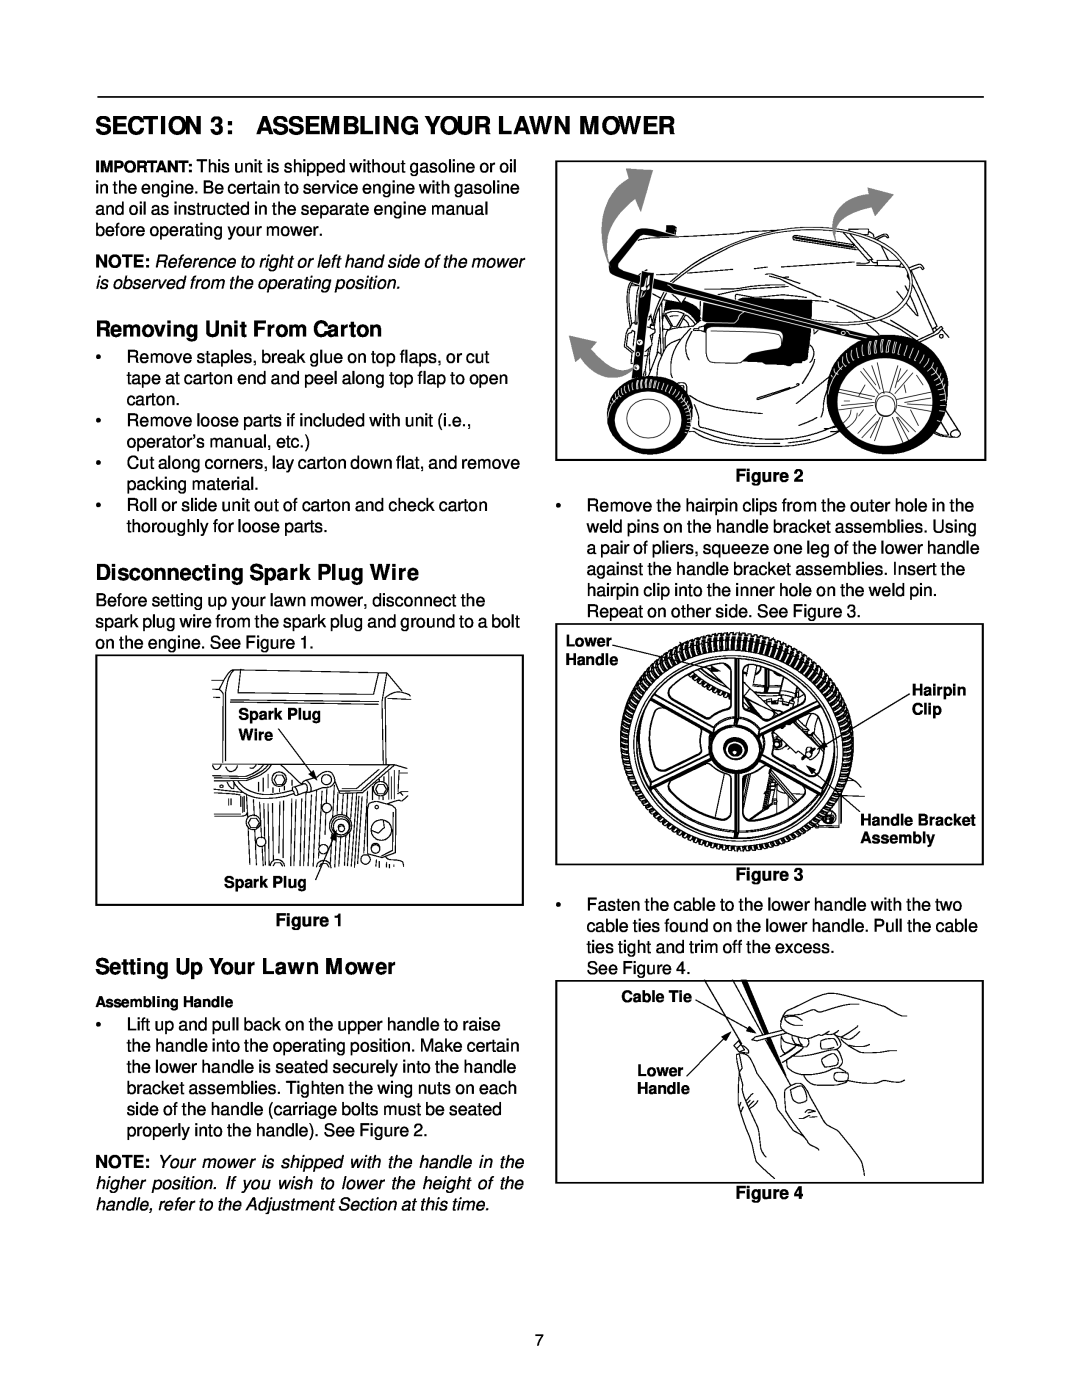 Yard-Man 11A-589C401 manual Assembling Your Lawn Mower, Removing Unit From Carton, Disconnecting Spark Plug Wire, Figure 